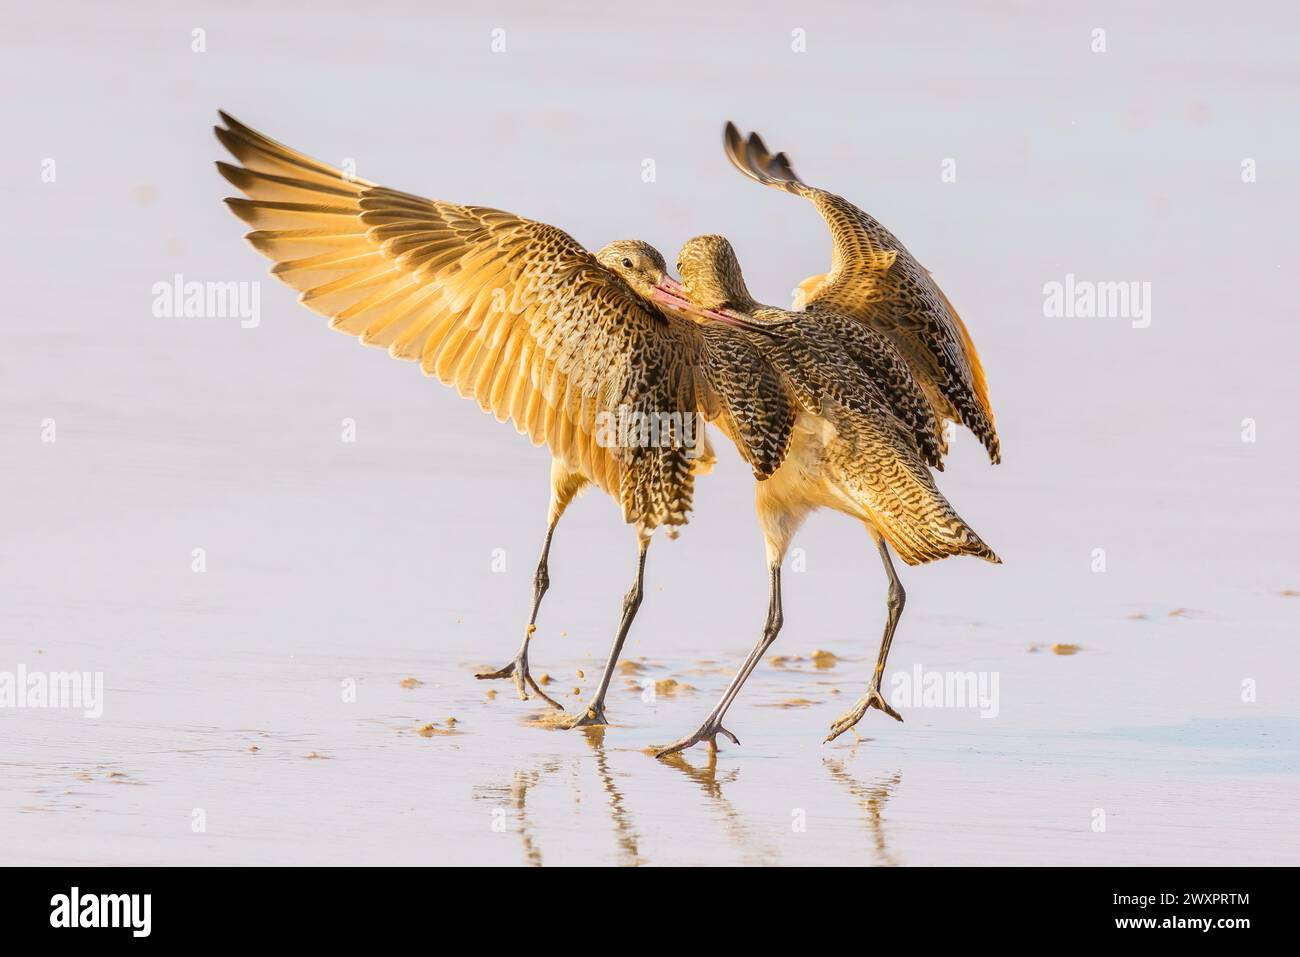 Marbled godwit on the beach at sunset. A close-up portrait of a large shorebird, California Central Coast. Stock Photo